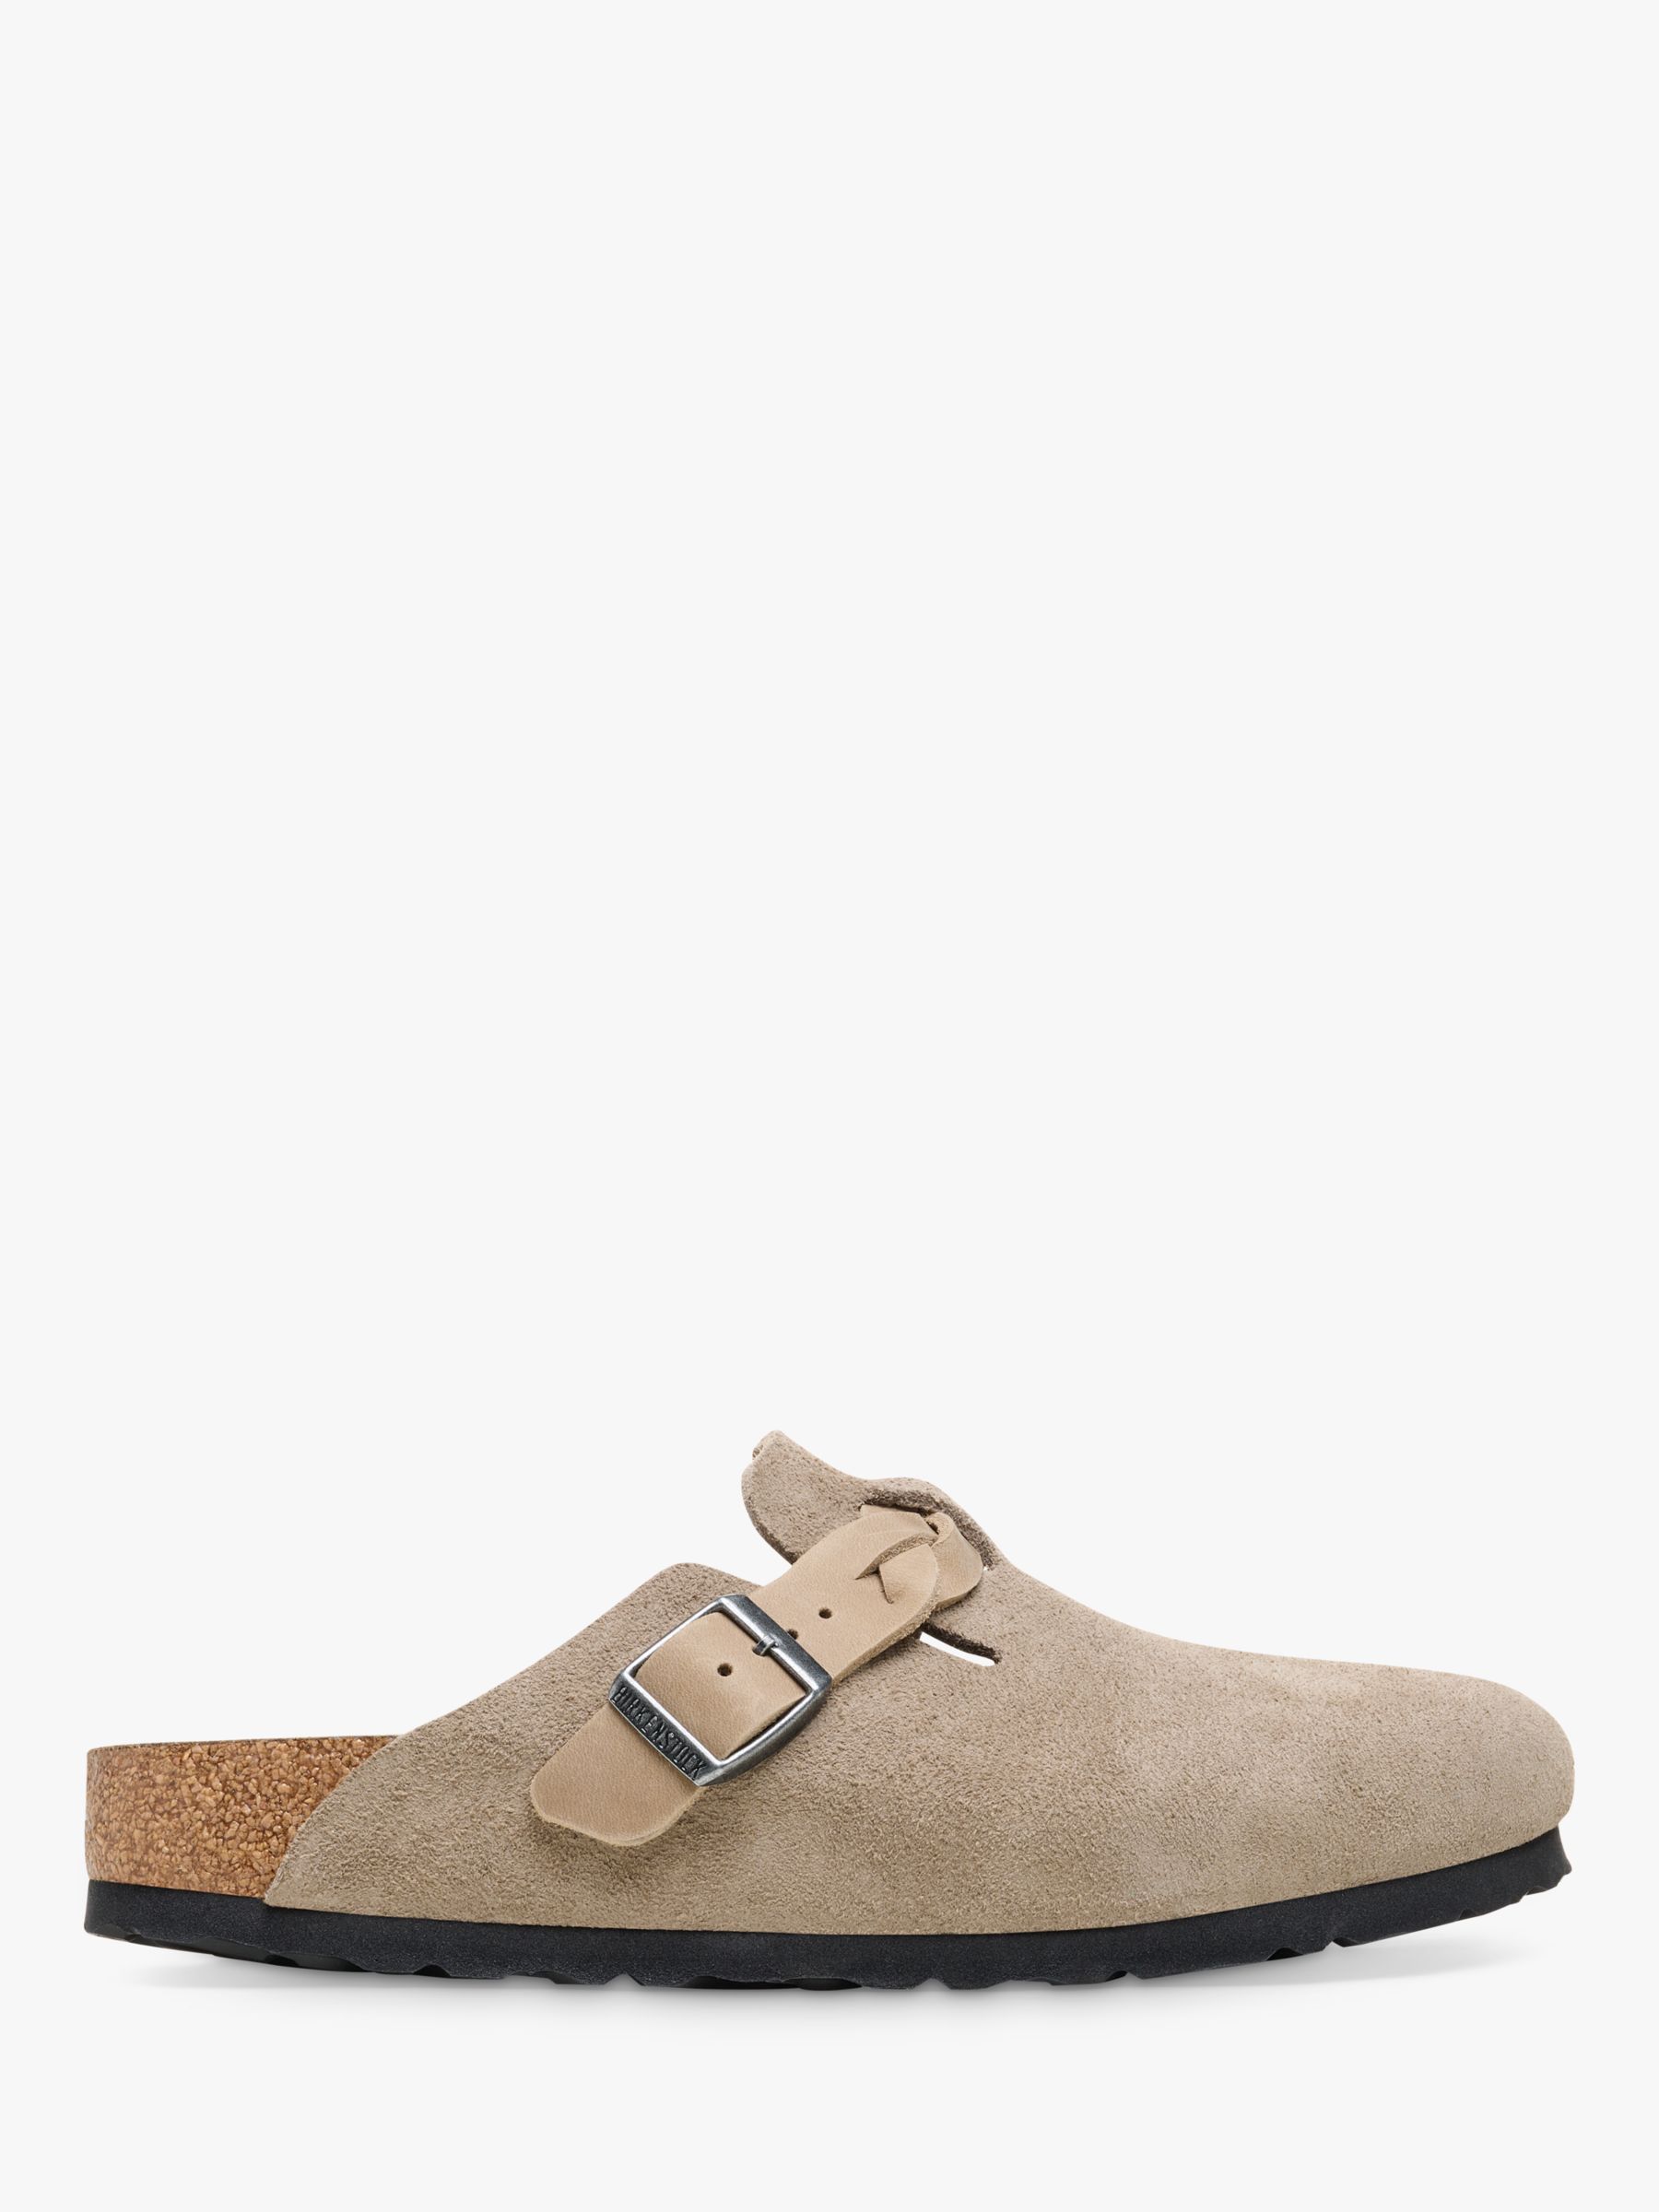 Birkenstock Braided Buckle Suede Clogs, Taupe at John Lewis & Partners